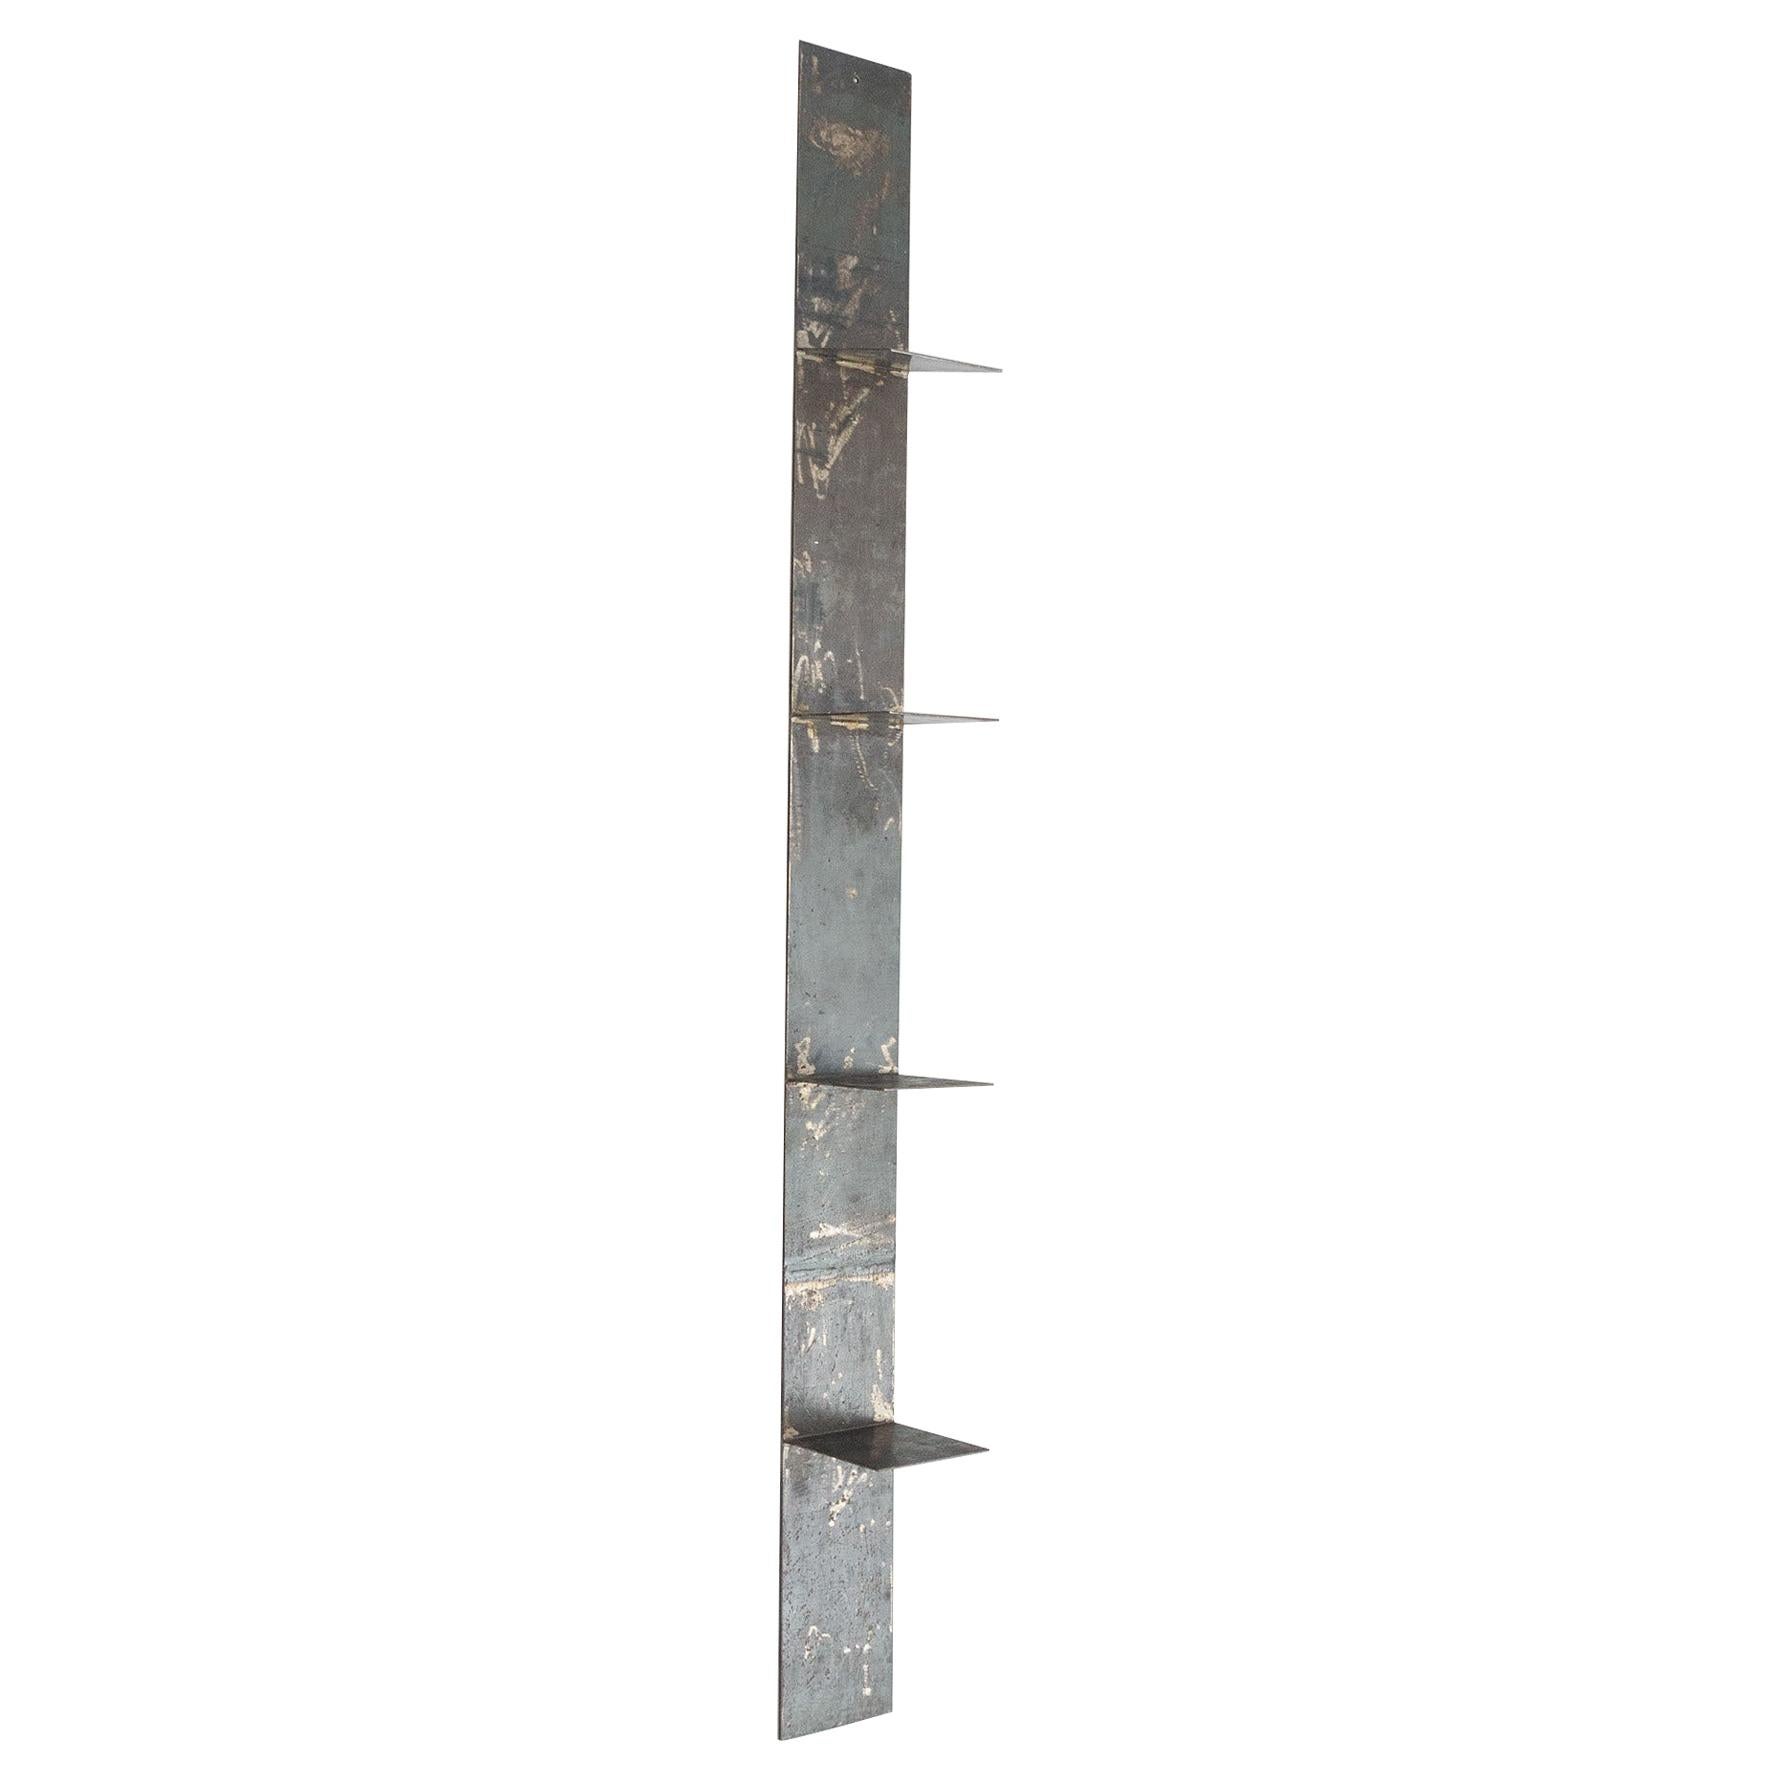 Ramon dels Horts Metal Wall Sculpture For Sale